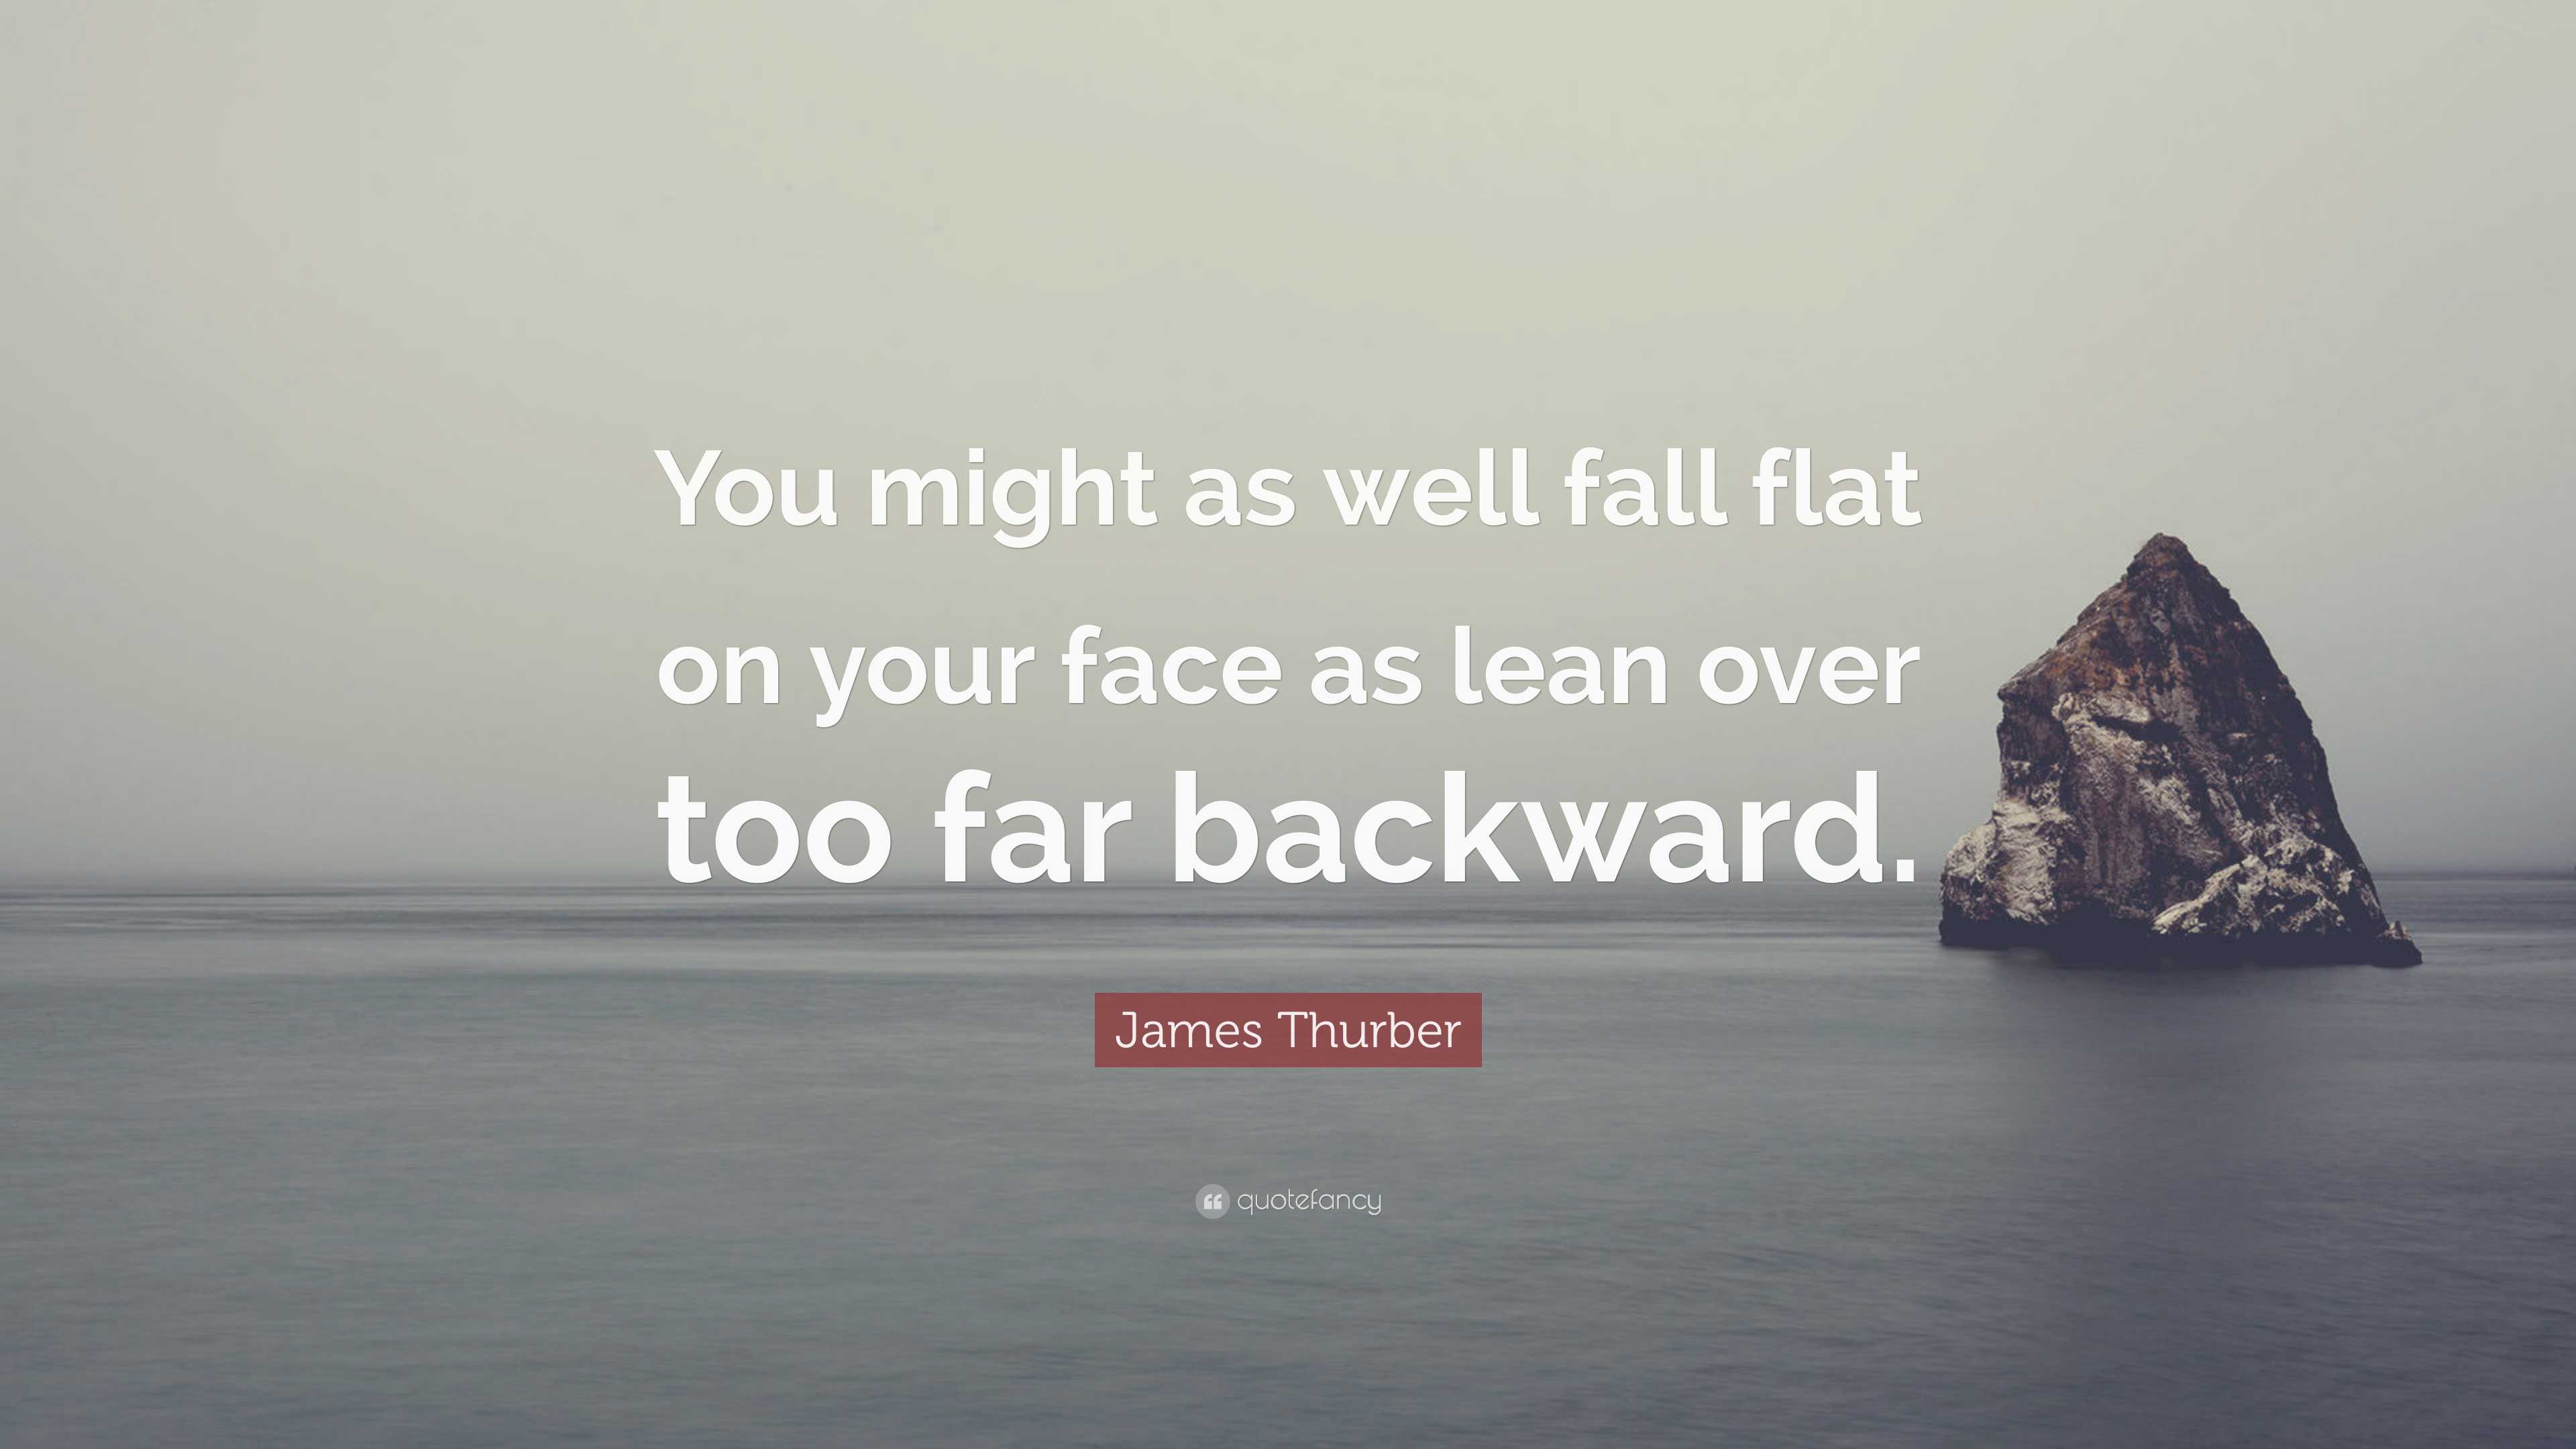 James Thurber Quote: “You might as well fall flat on your face as lean over  too